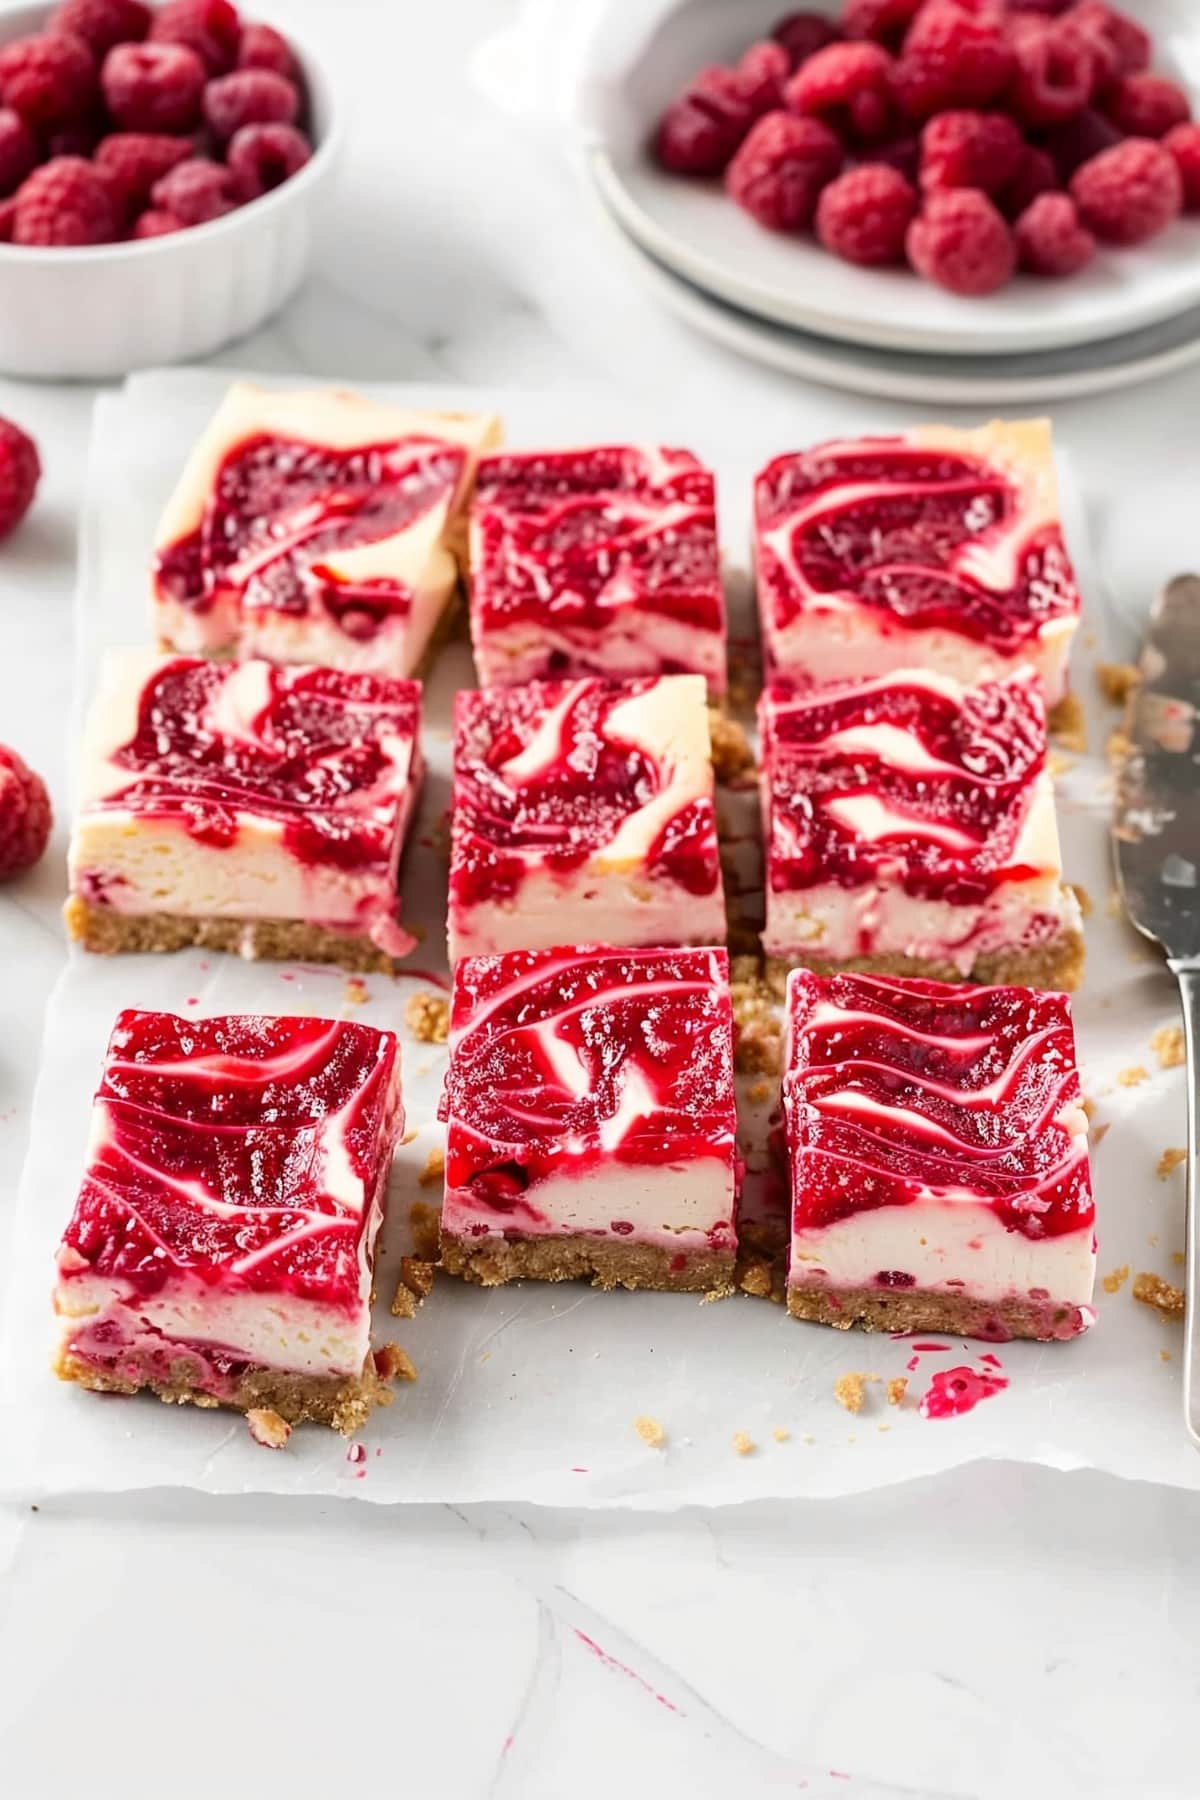 Divine dessert delight: Swirling raspberry cheesecake bars on parchment paper